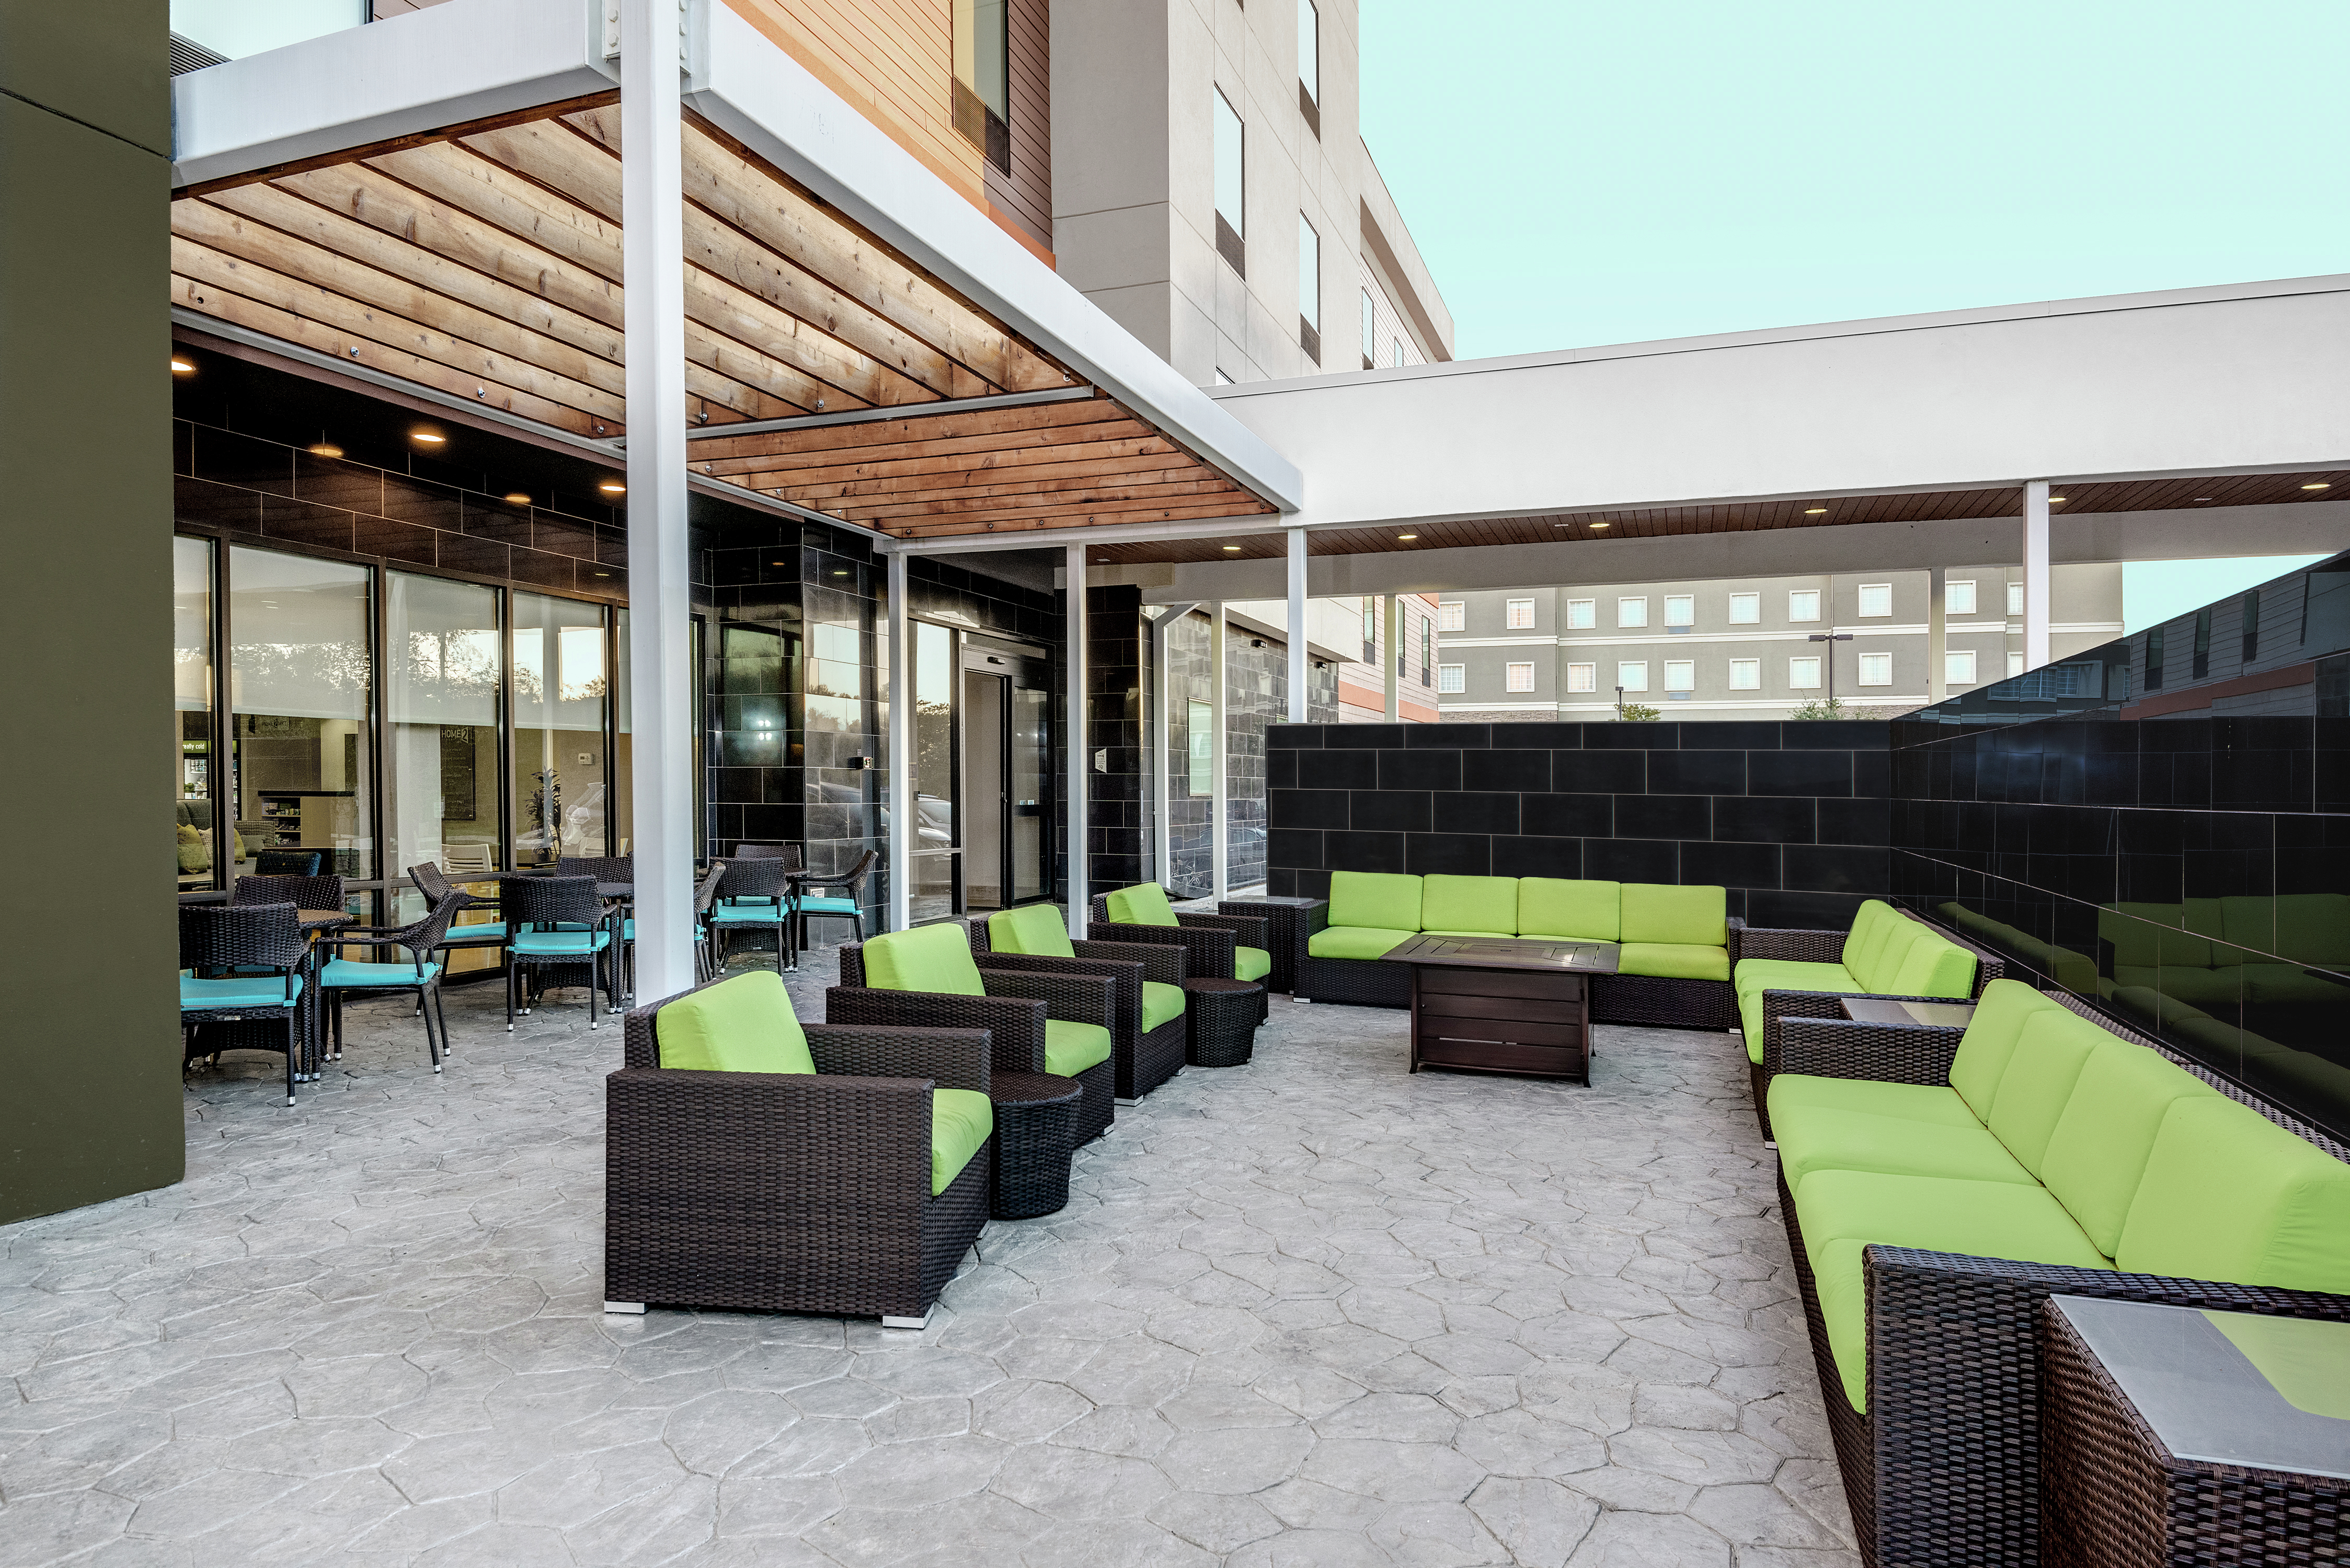 Outdoor Patio with Lounge Seating